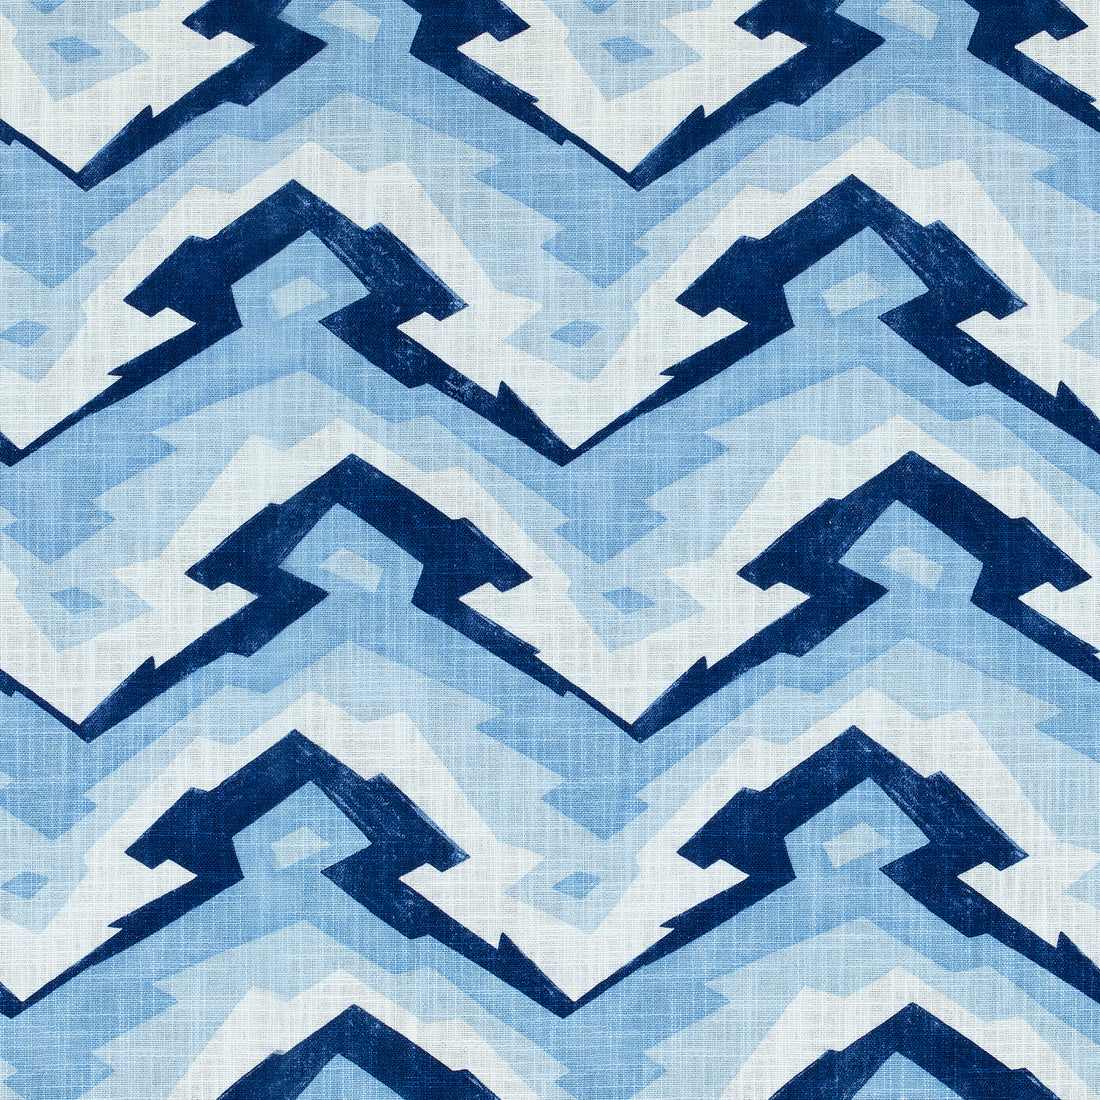 Deco Mountain fabric in blue color - pattern number F913077 - by Thibaut in the Summer House collection